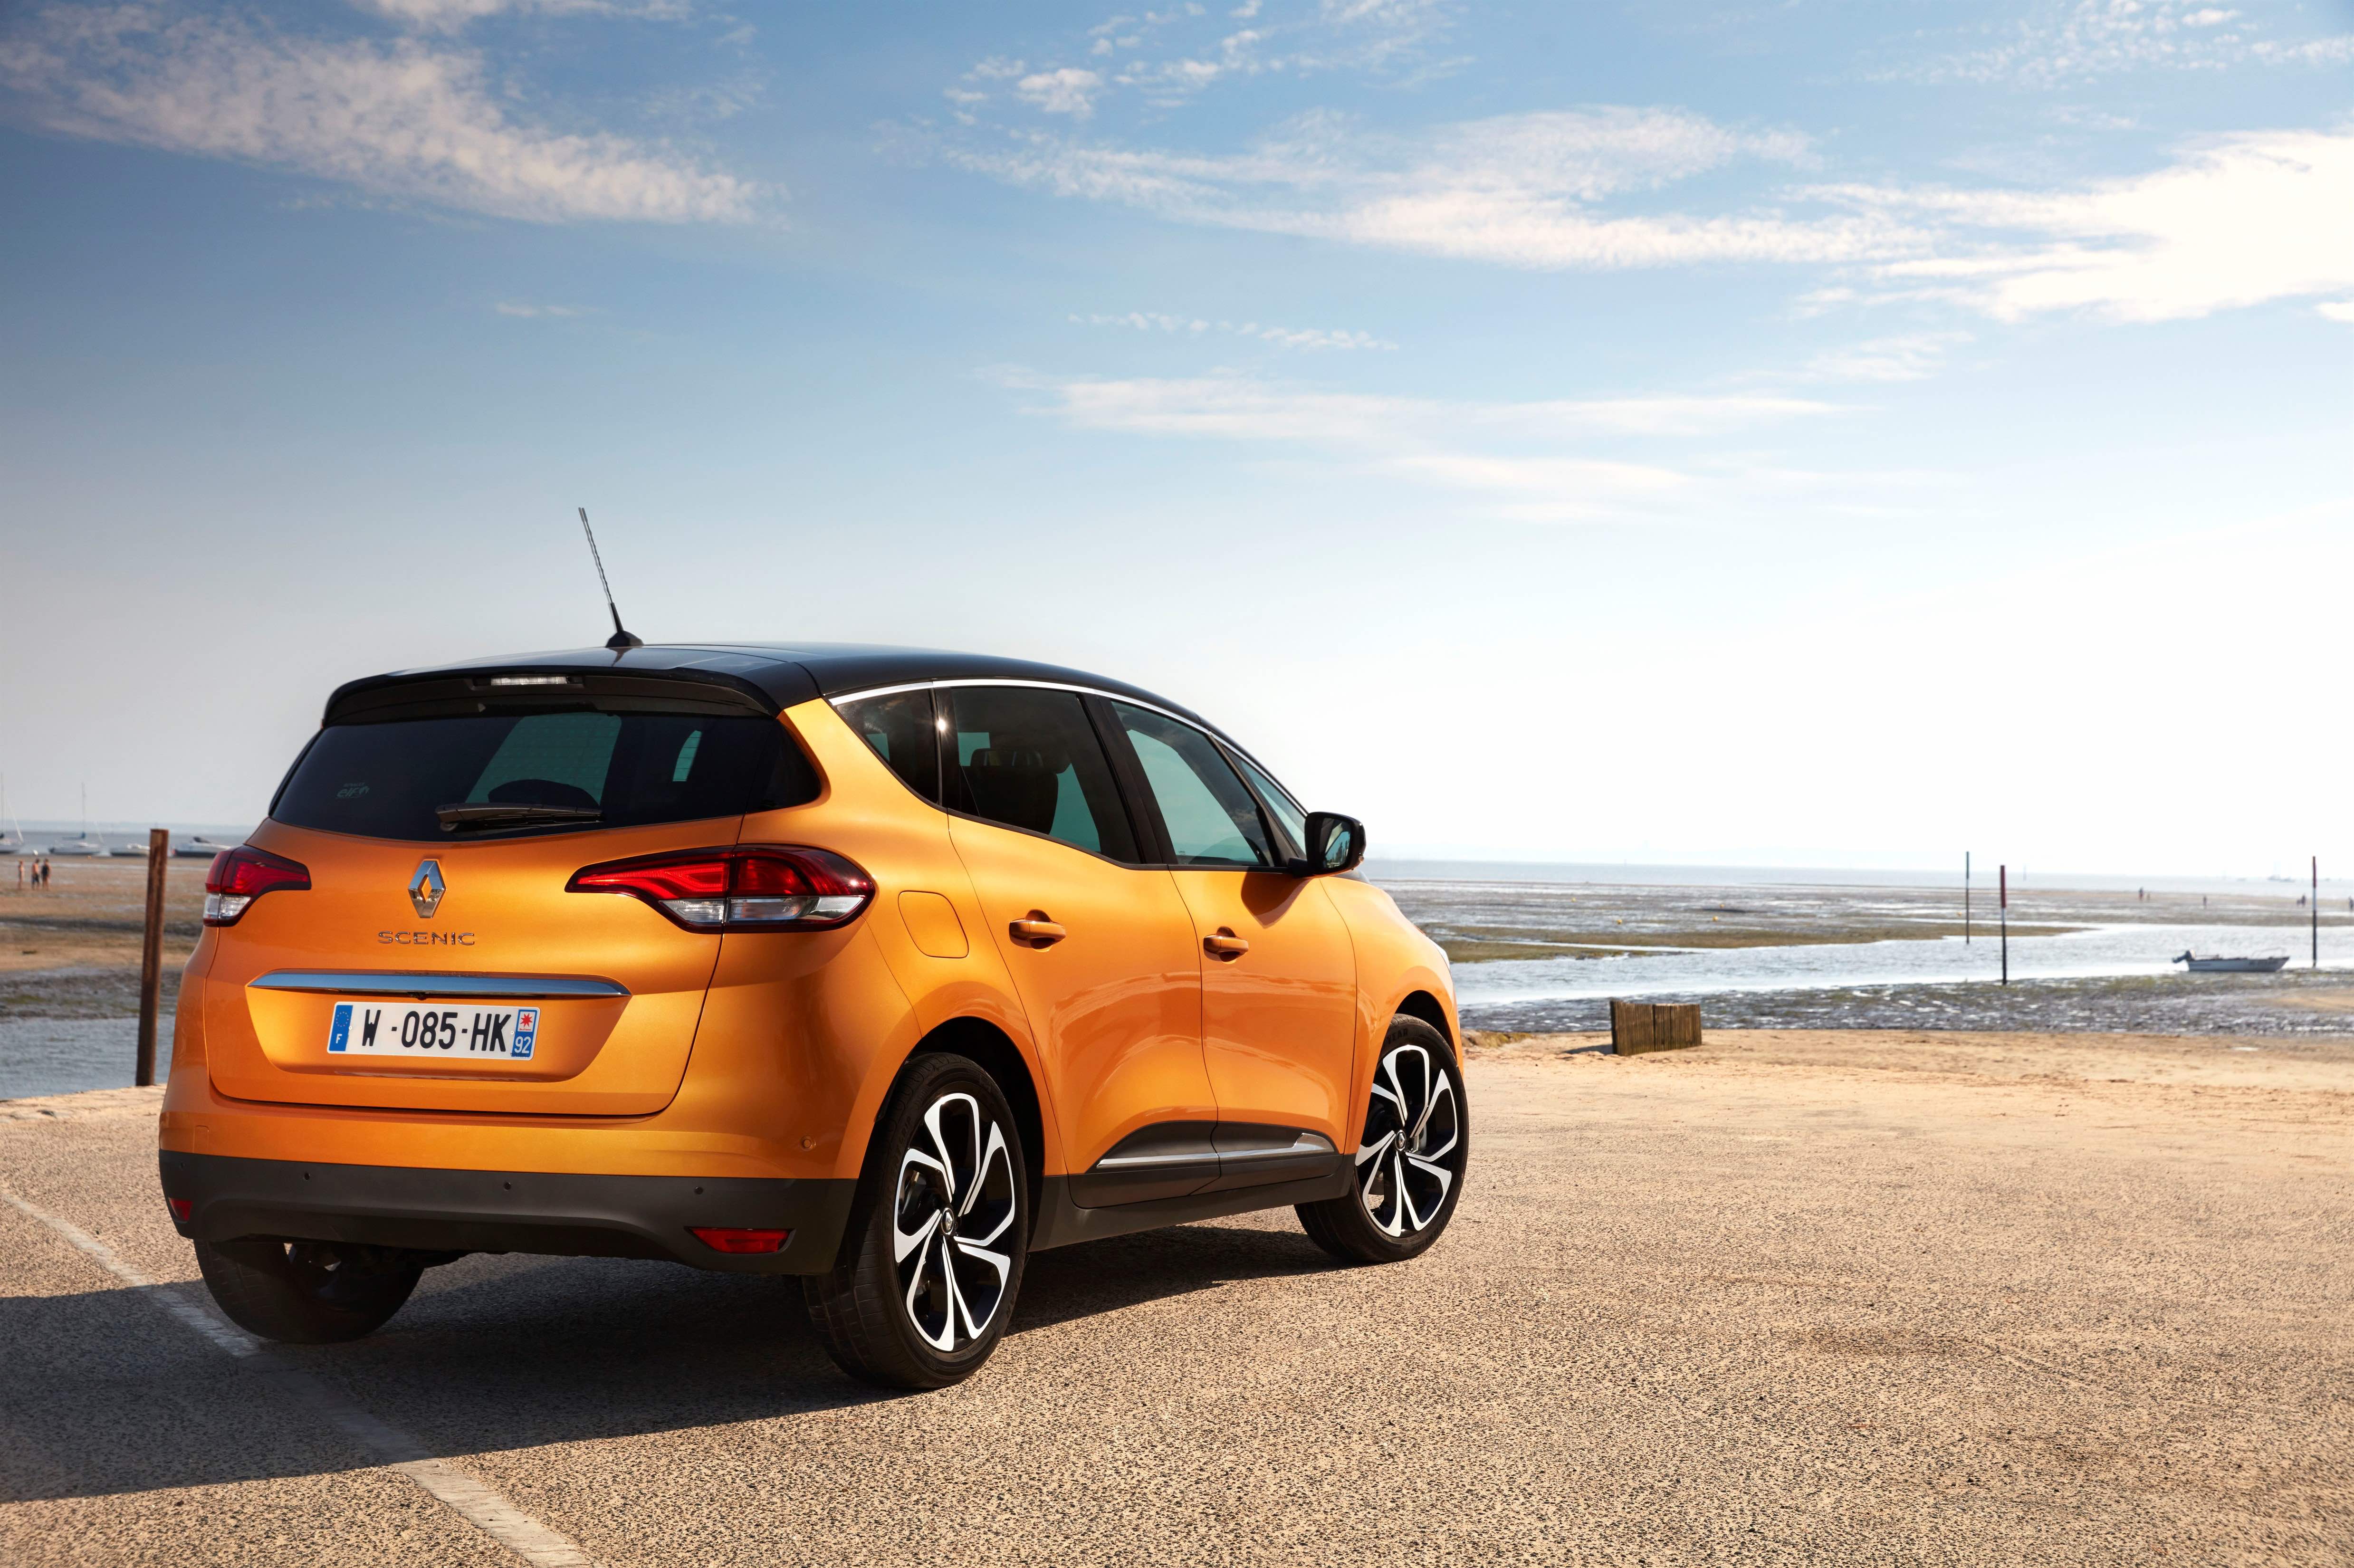 Renault Scenic accessories specifications